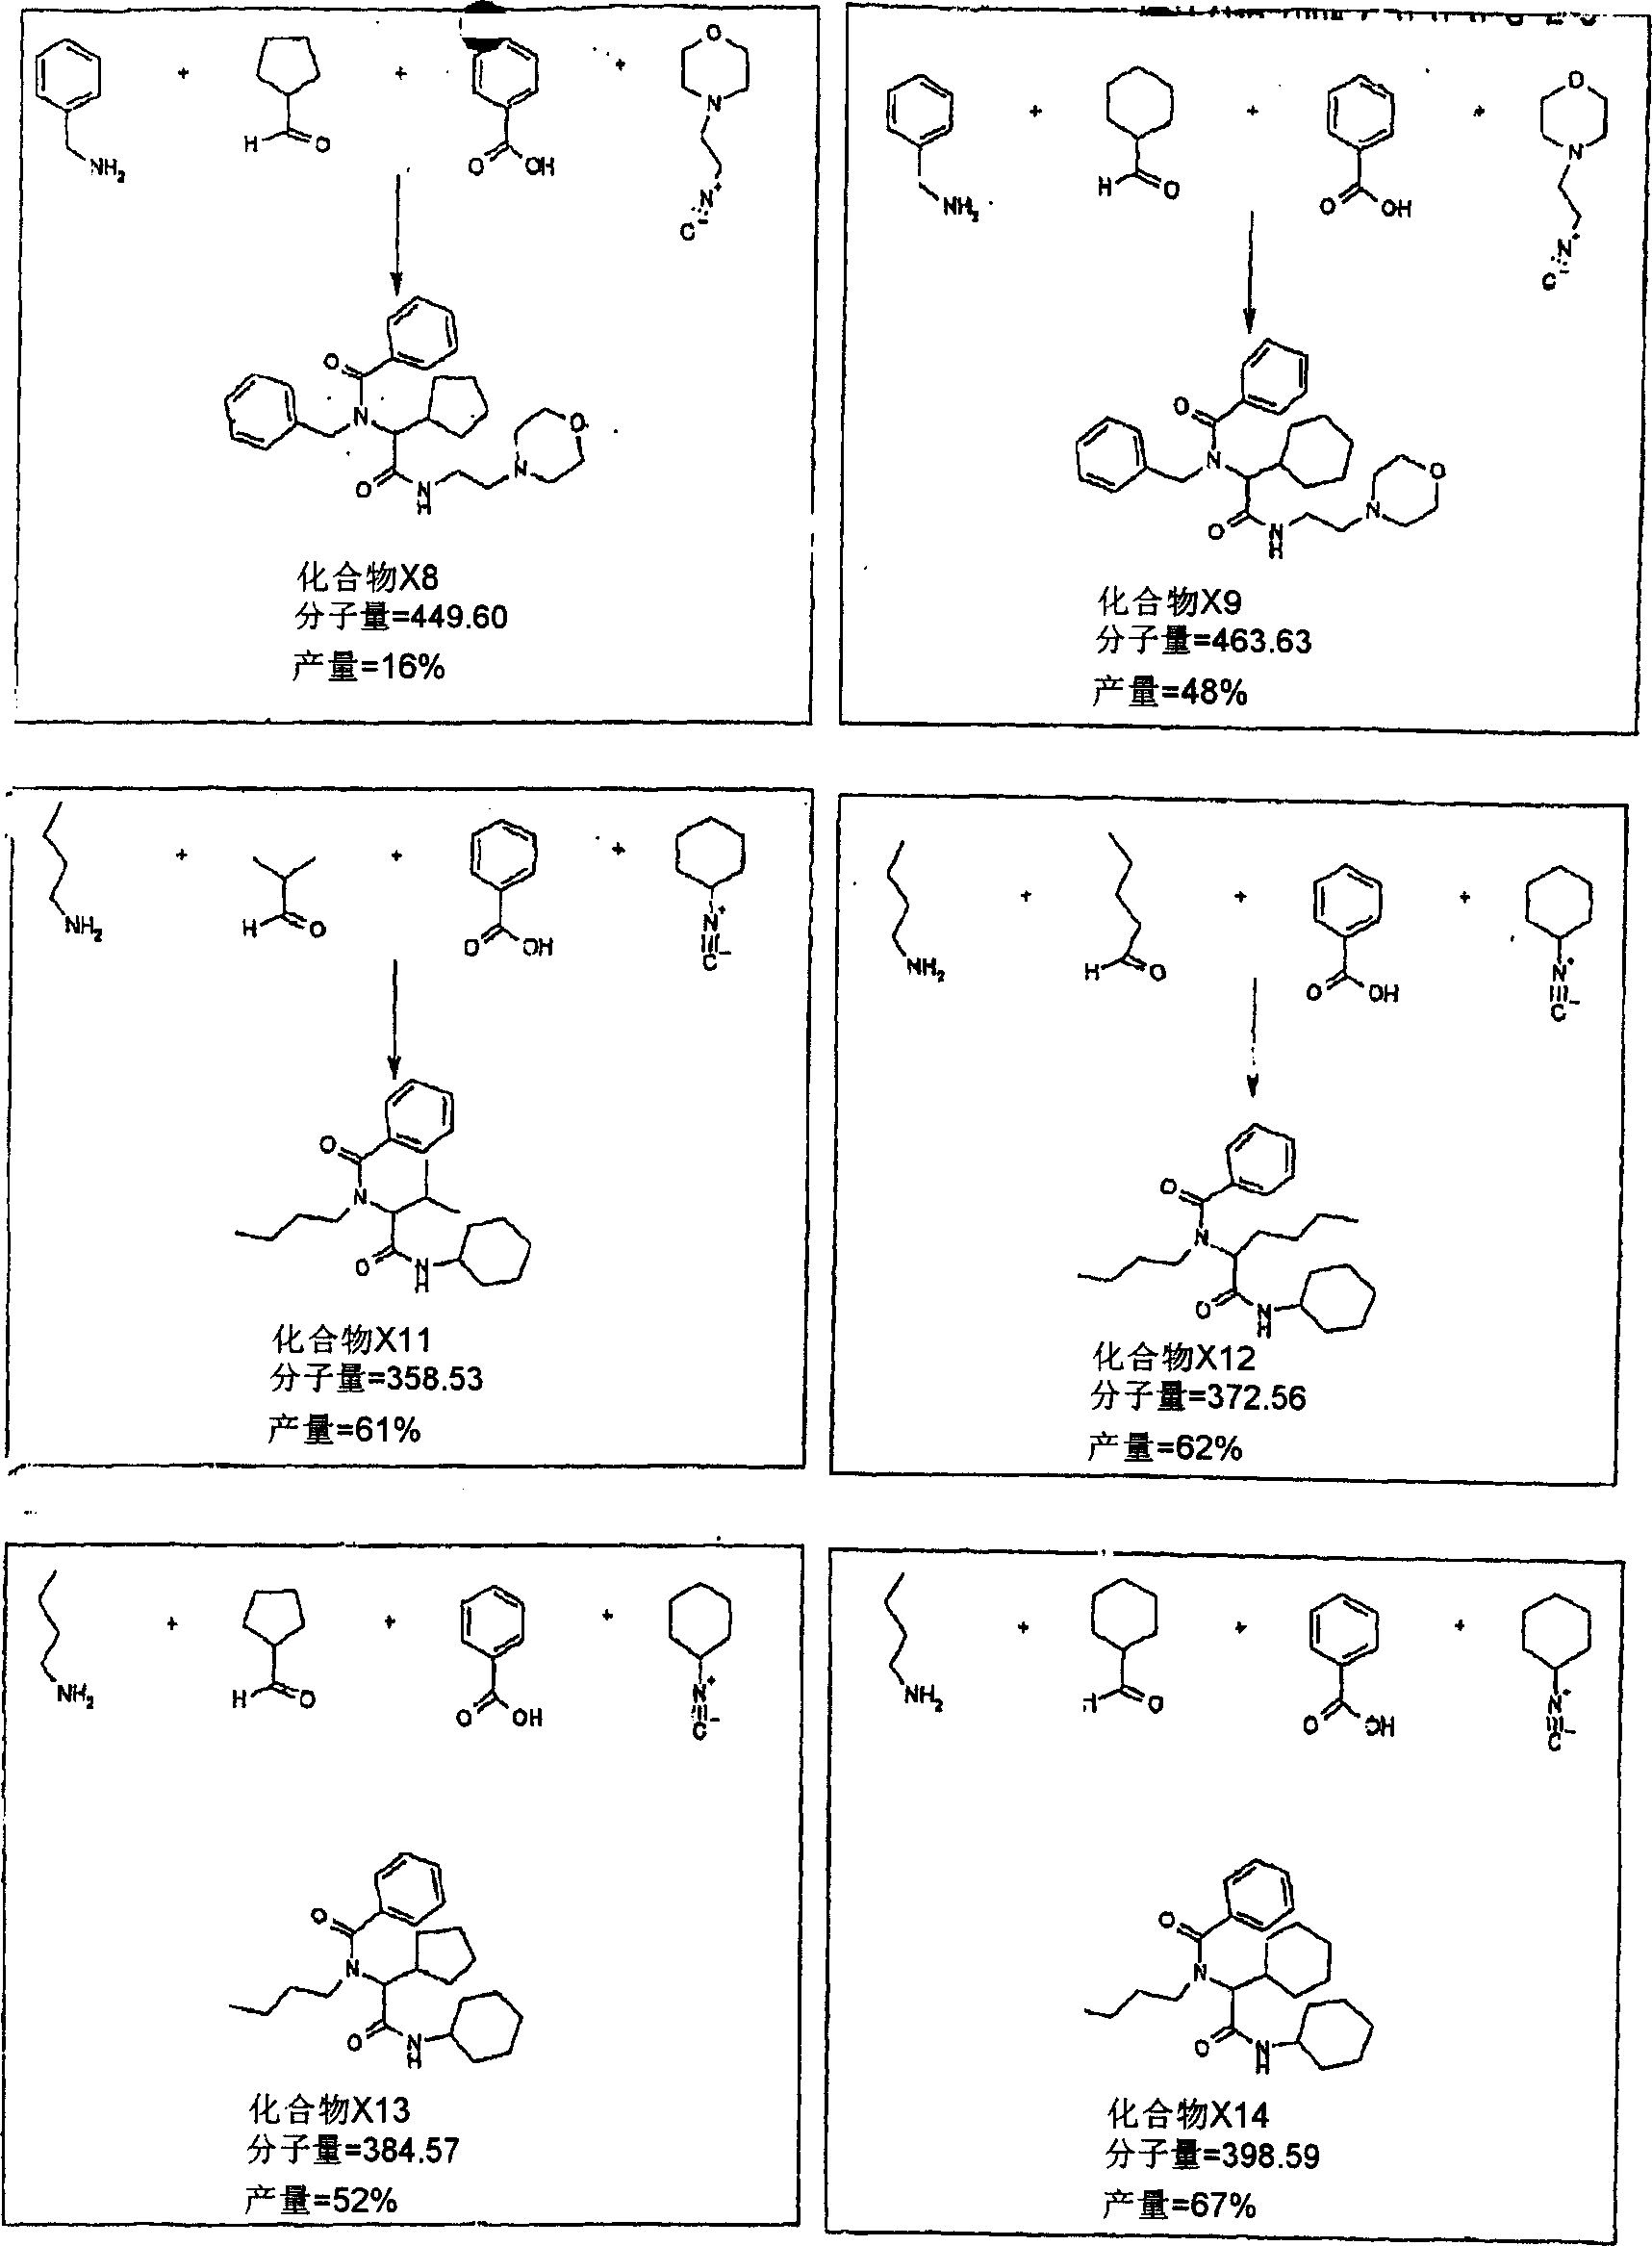 Library of compounds labelled with radioisotope